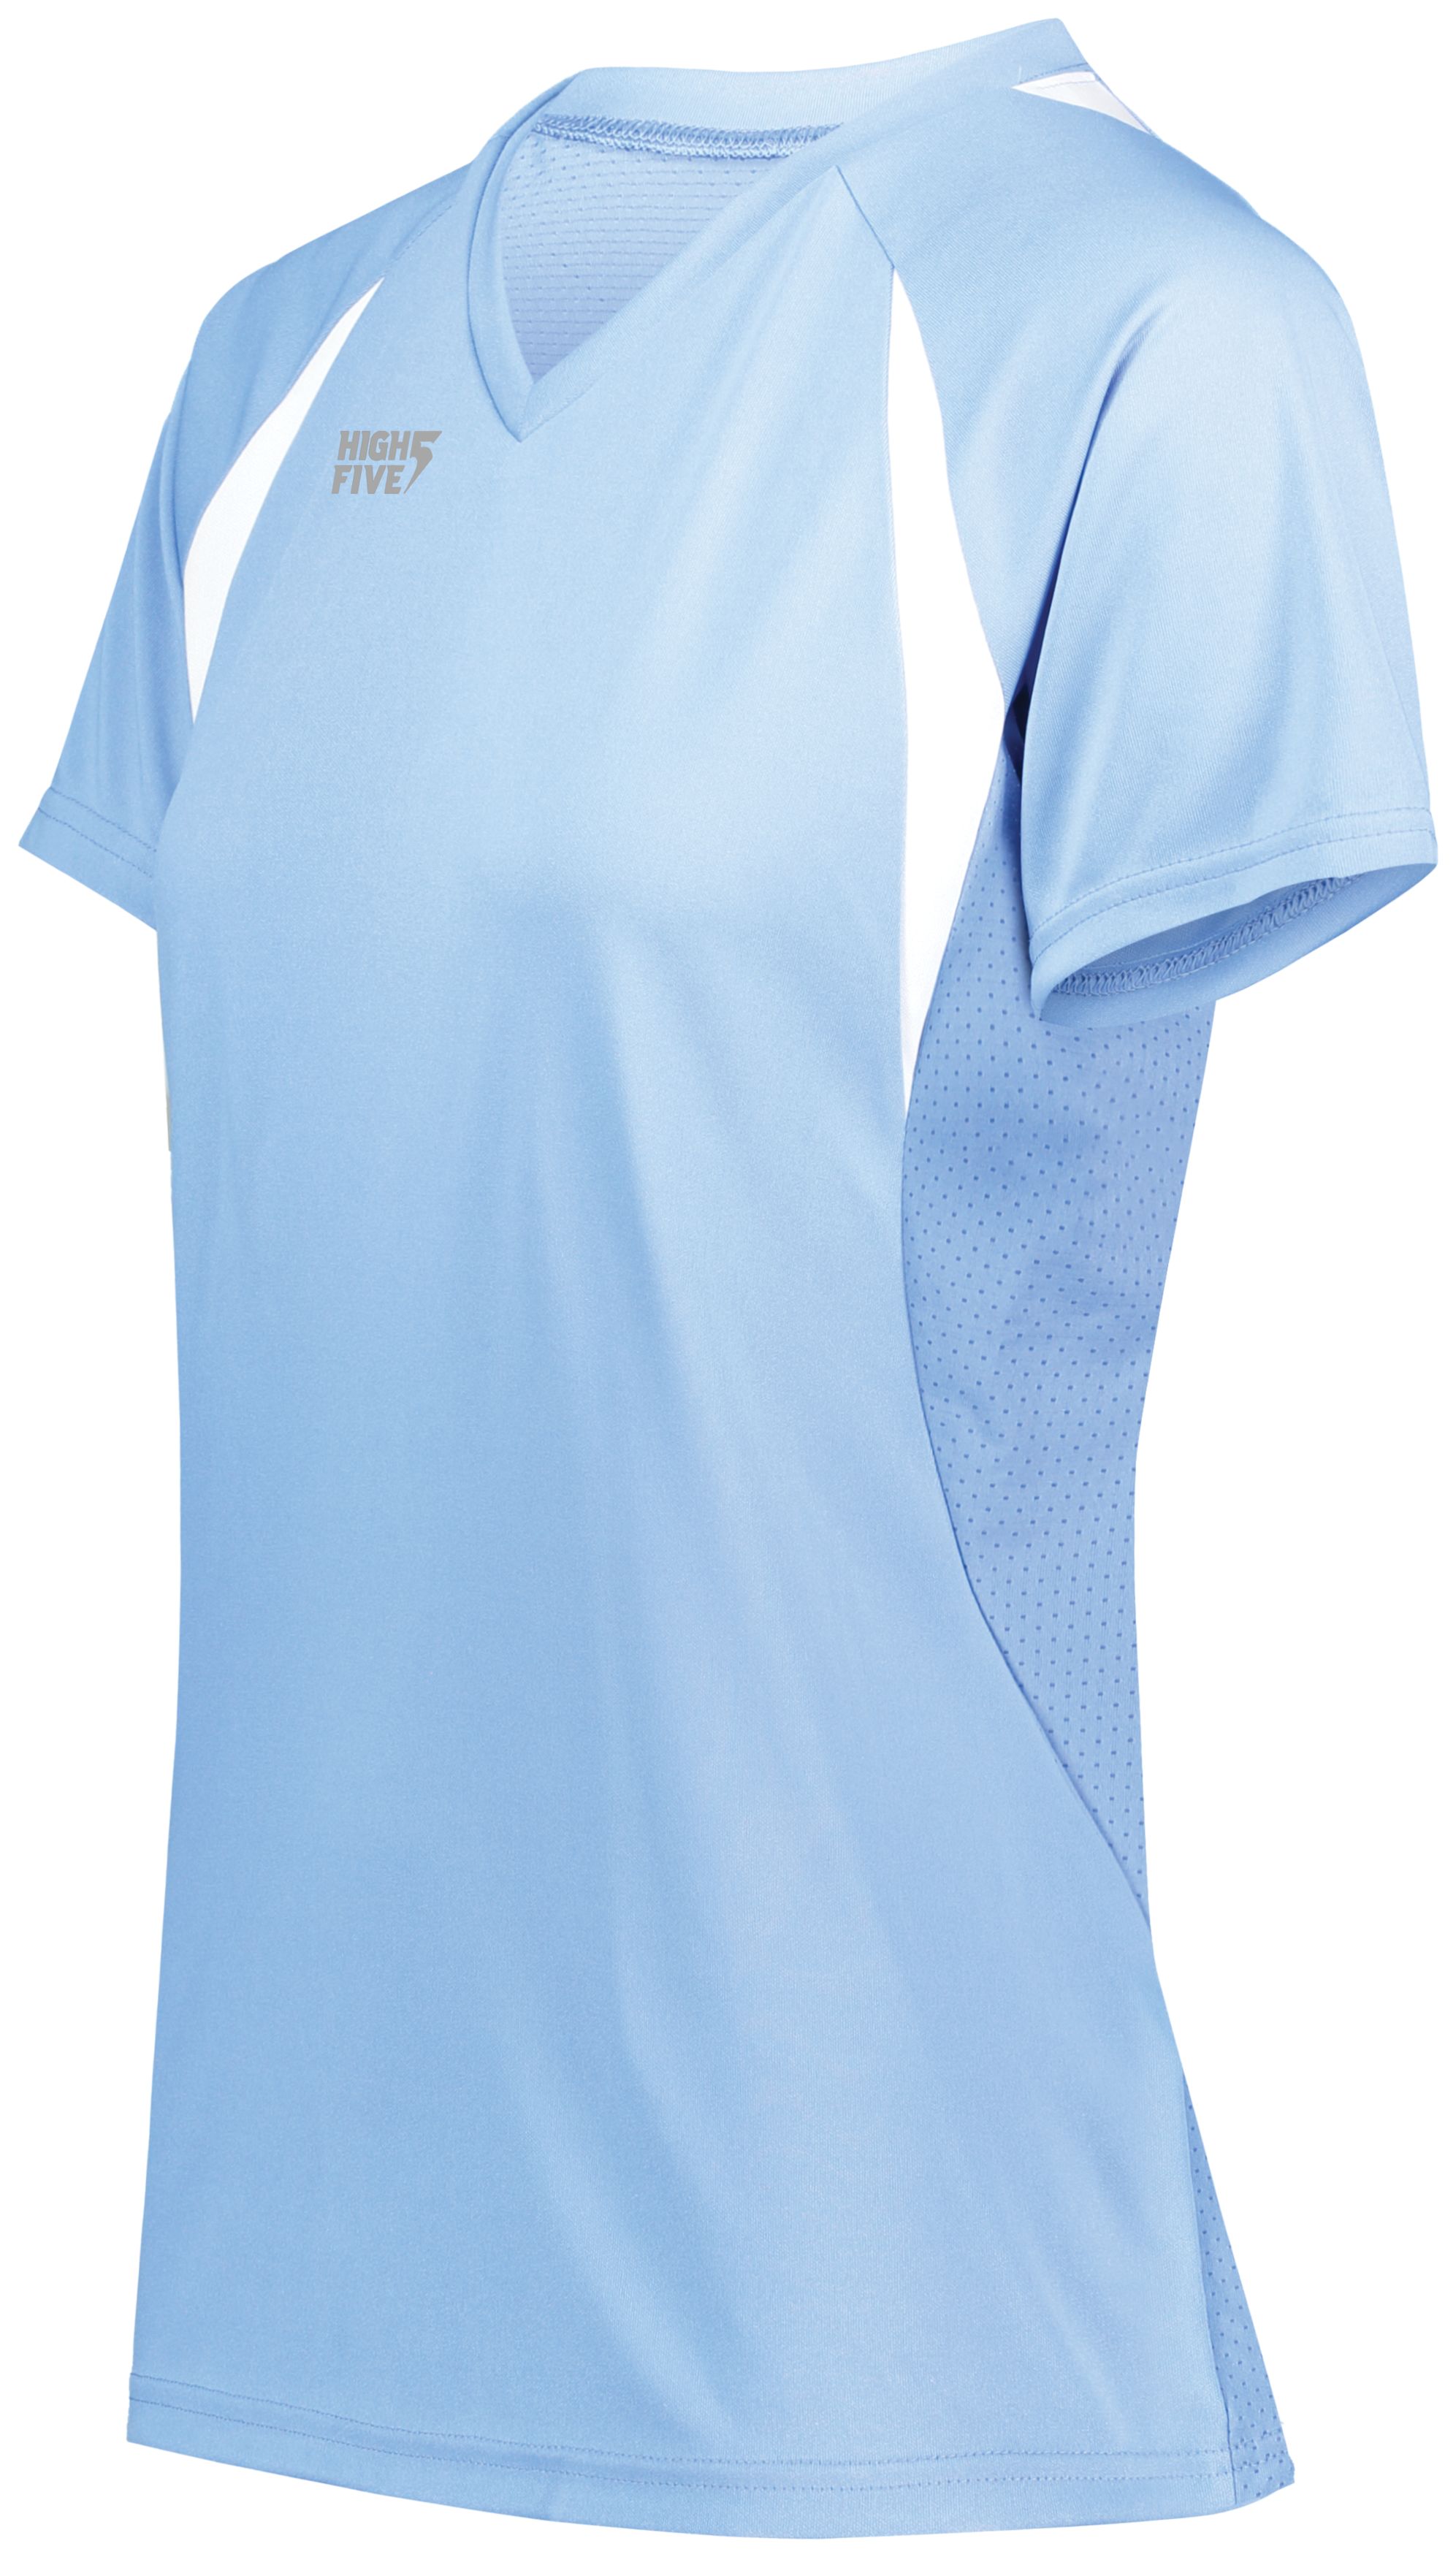 click to view Columbia Blue/White